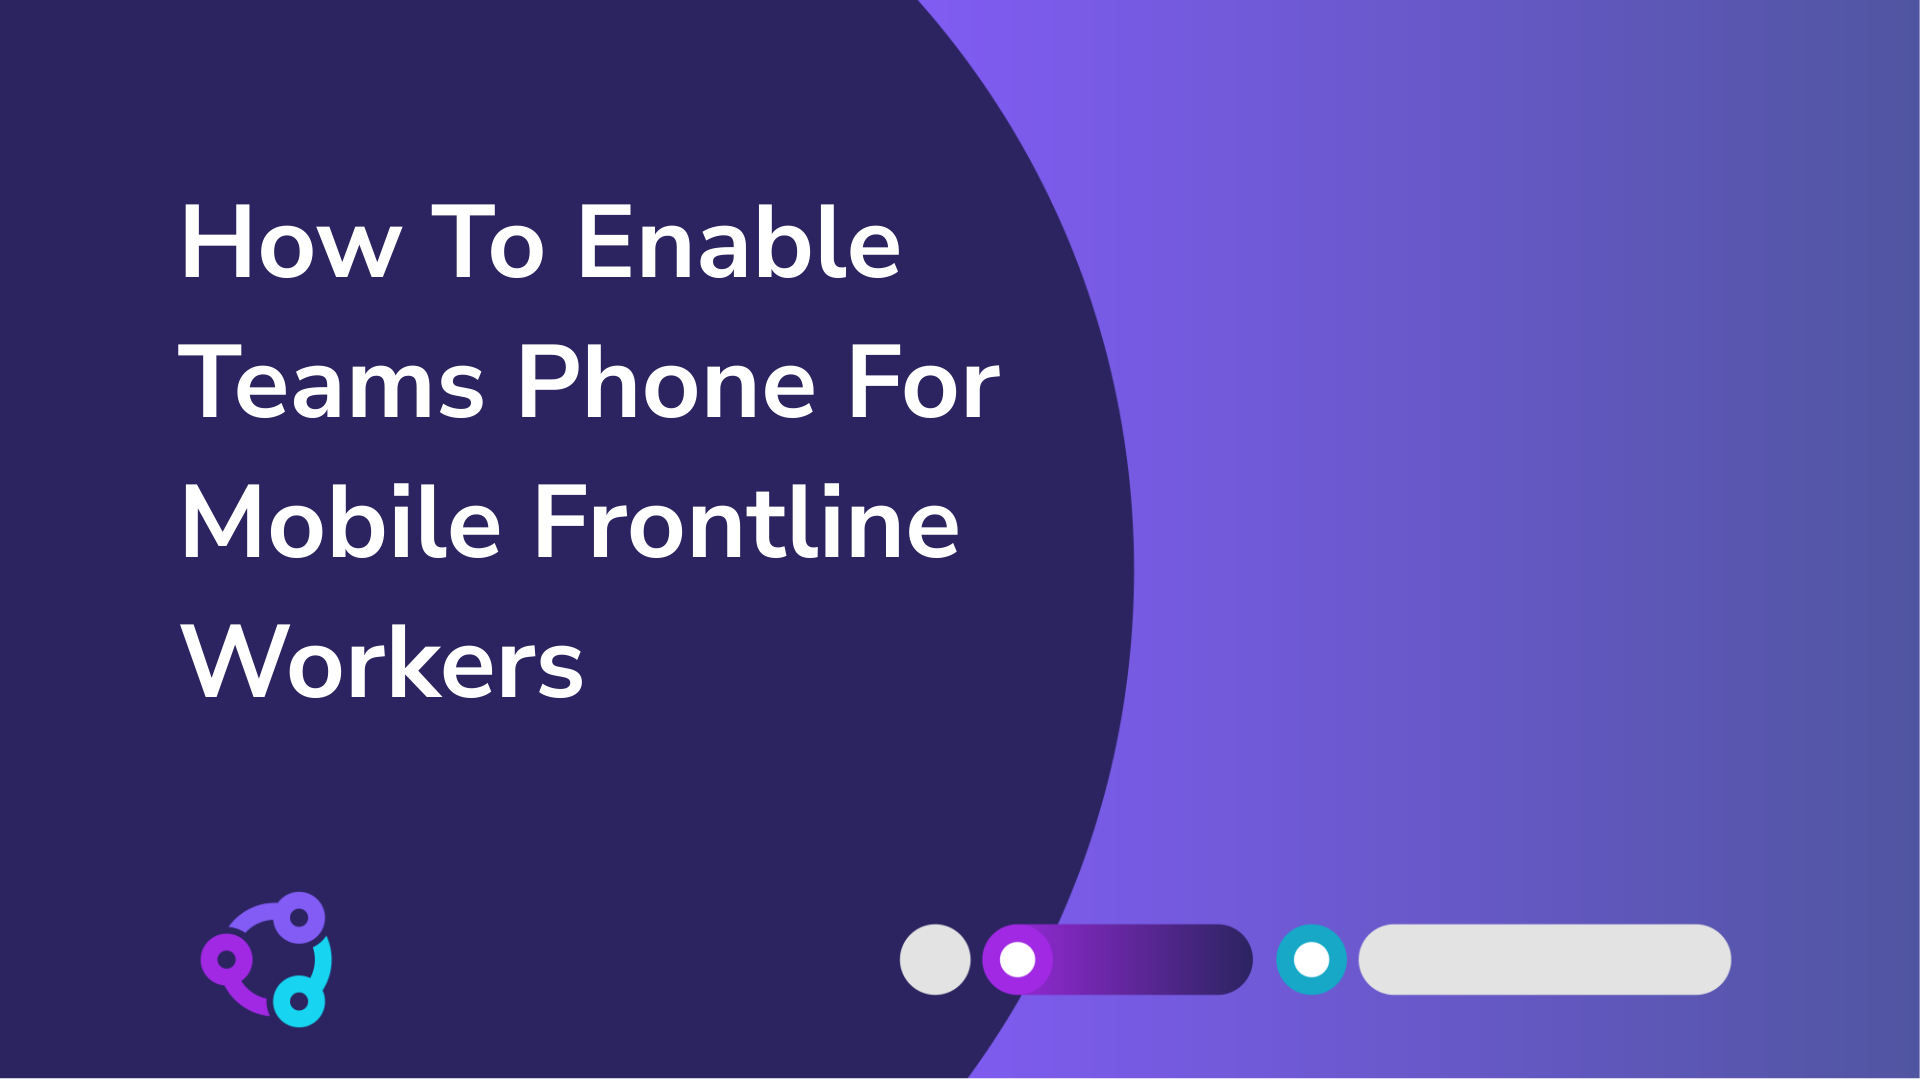 How To Enable Teams Phone For Mobile Frontline Workers